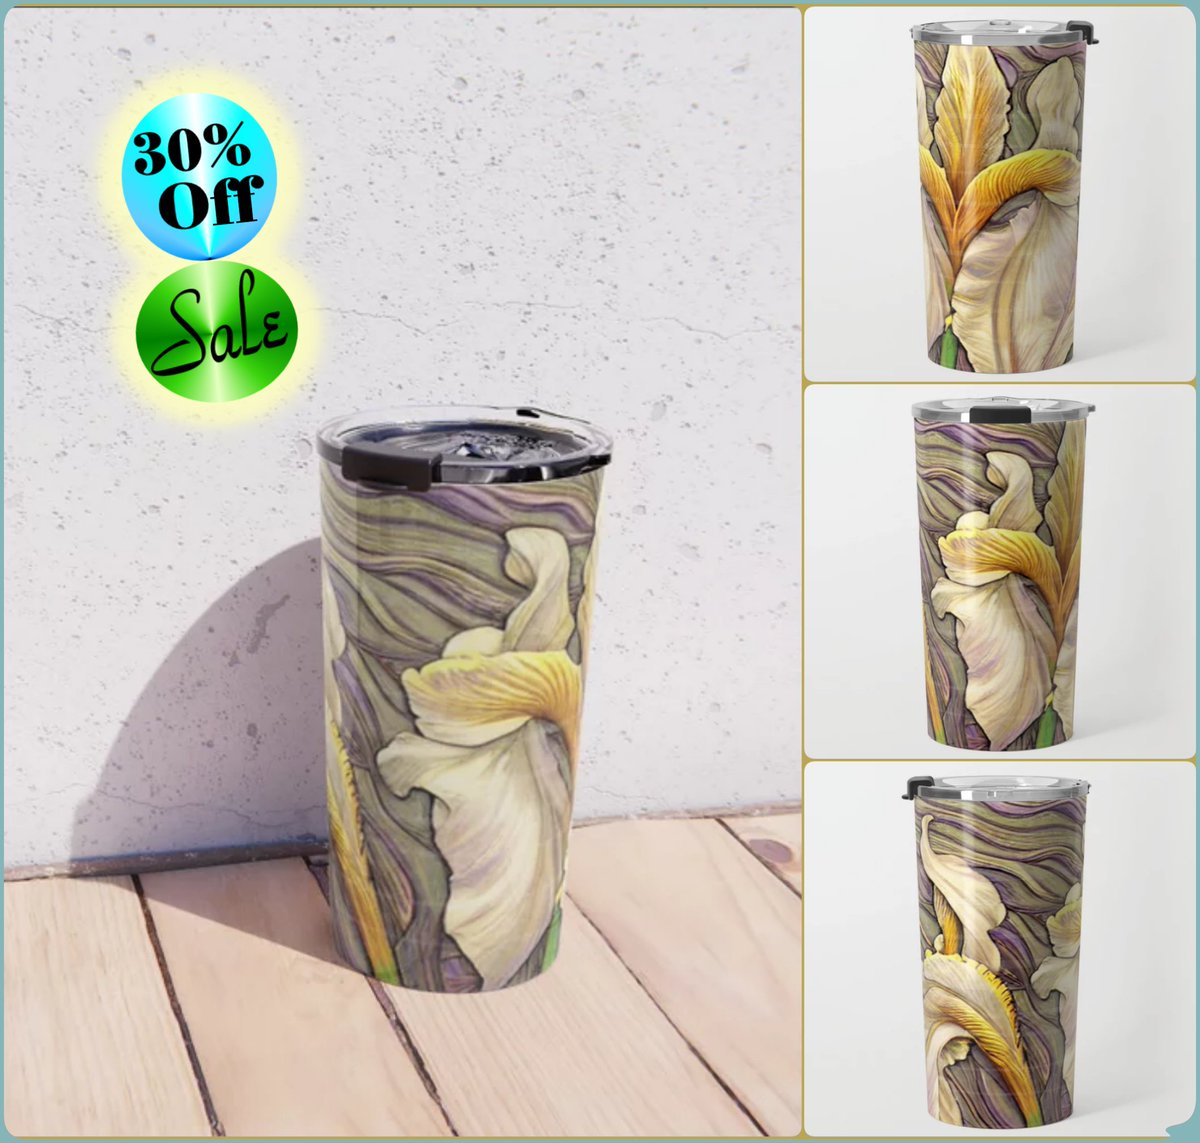 *SALE 30% Off* New Rhythm Travel Mug~by Art_Falaxy ~Art Exquisite!~ #coasters #gifts #trays #mugs #coffee #society6 #travel #artfalaxy #art #accents #modern #trendy #wine #water #placemats #tablecloths #runners #beige #yellow #purple society6.com/product/new-rh…